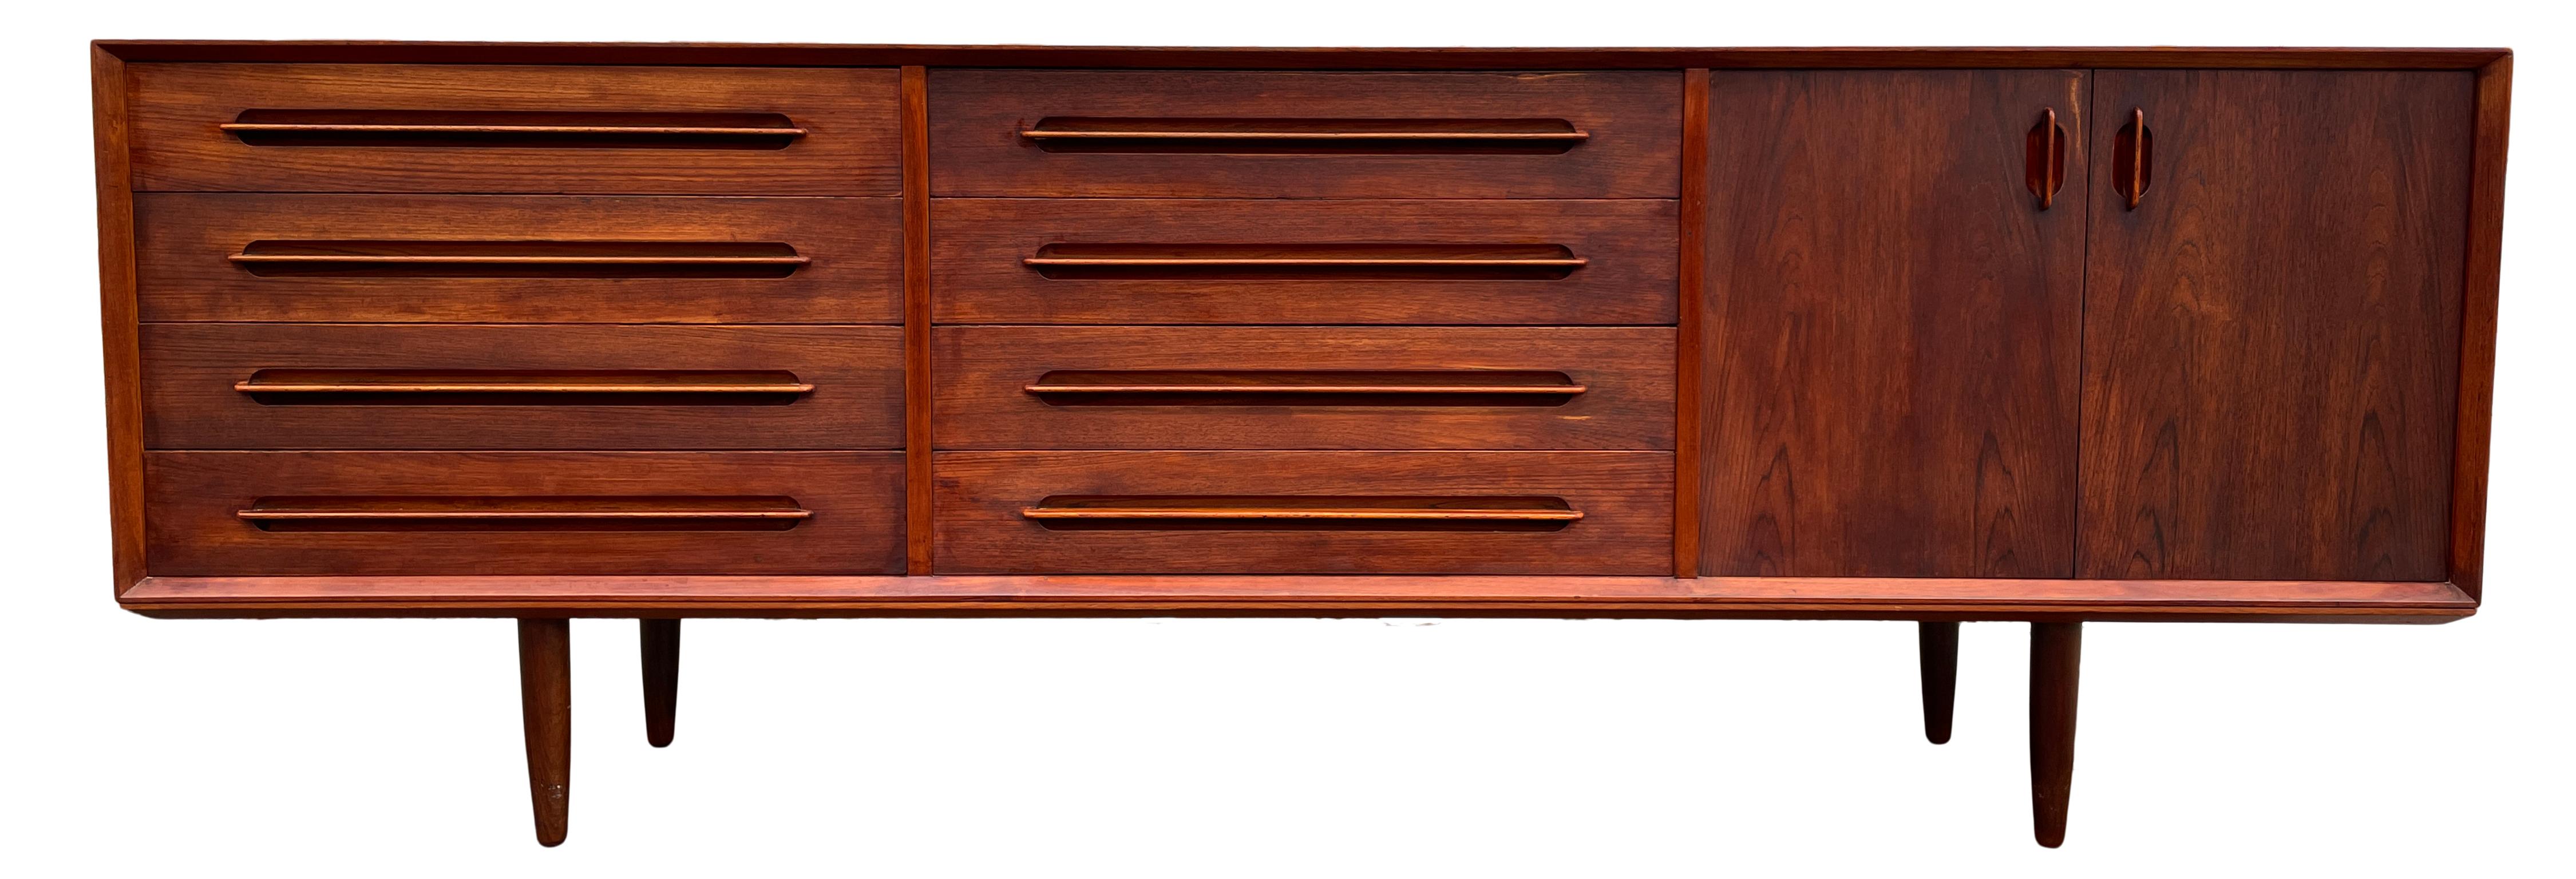 Mid Century Danish Modern Teak Long Credenza with 8 Drawers Cabinet 4